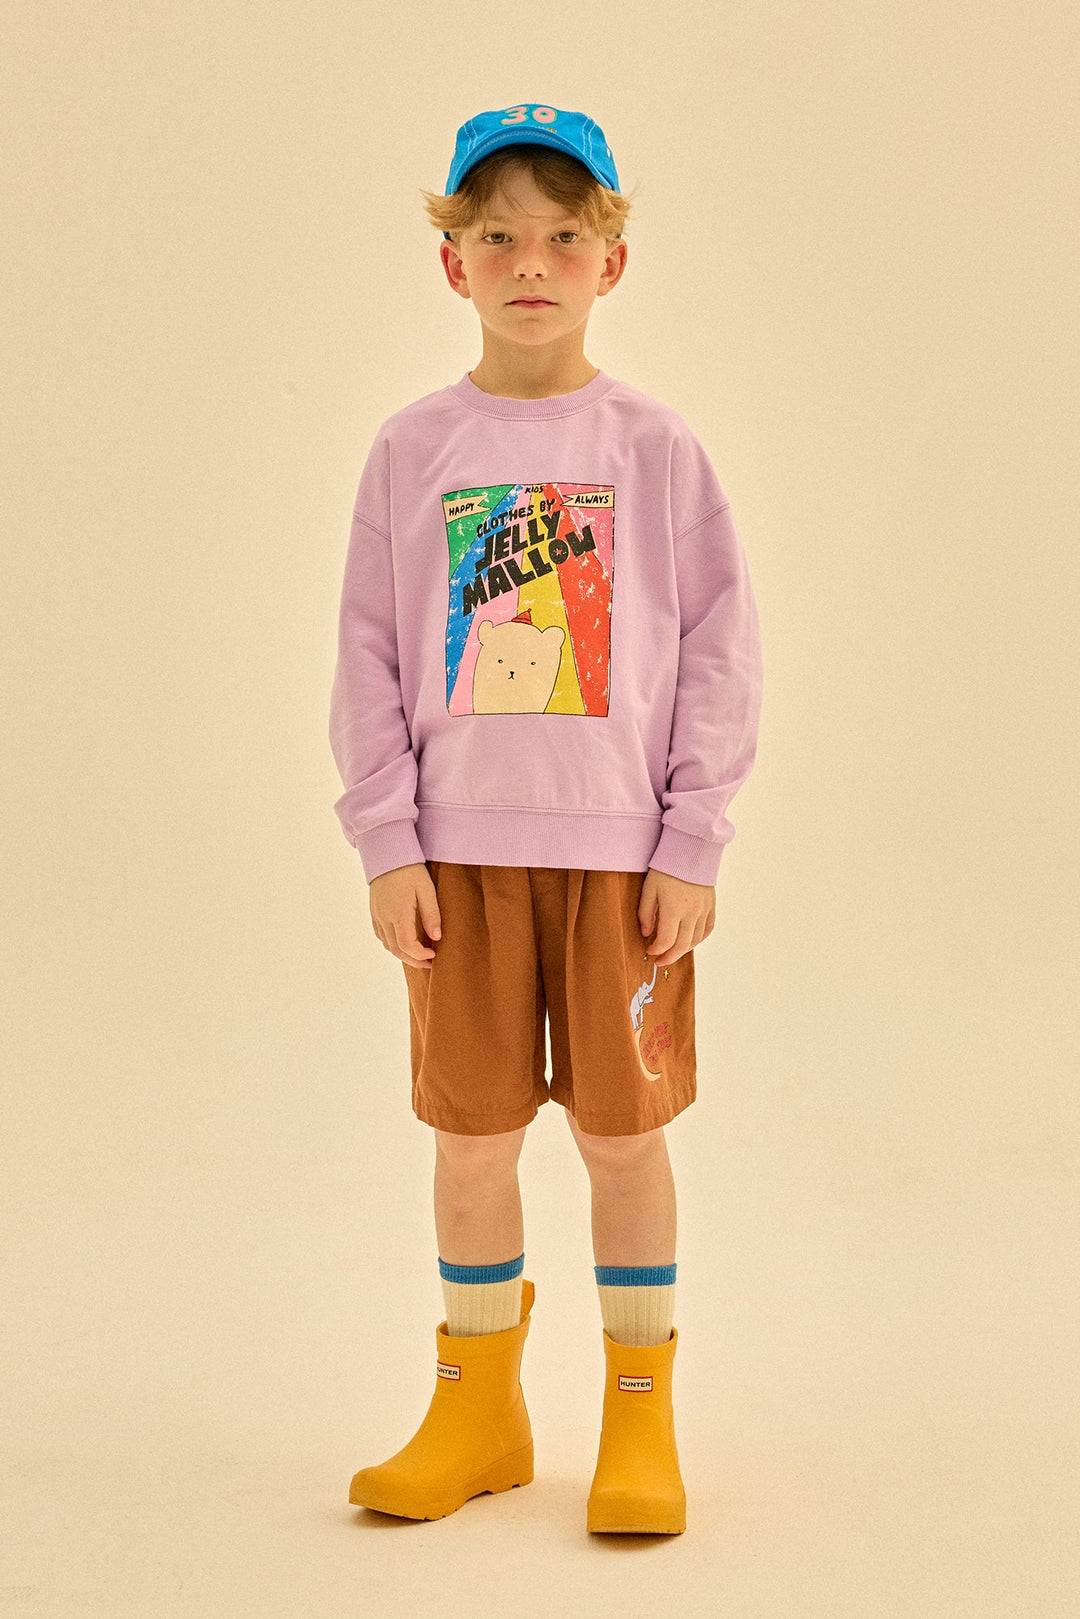 Cereal Sweatshirt by Jelly Mallow - Petite Belle